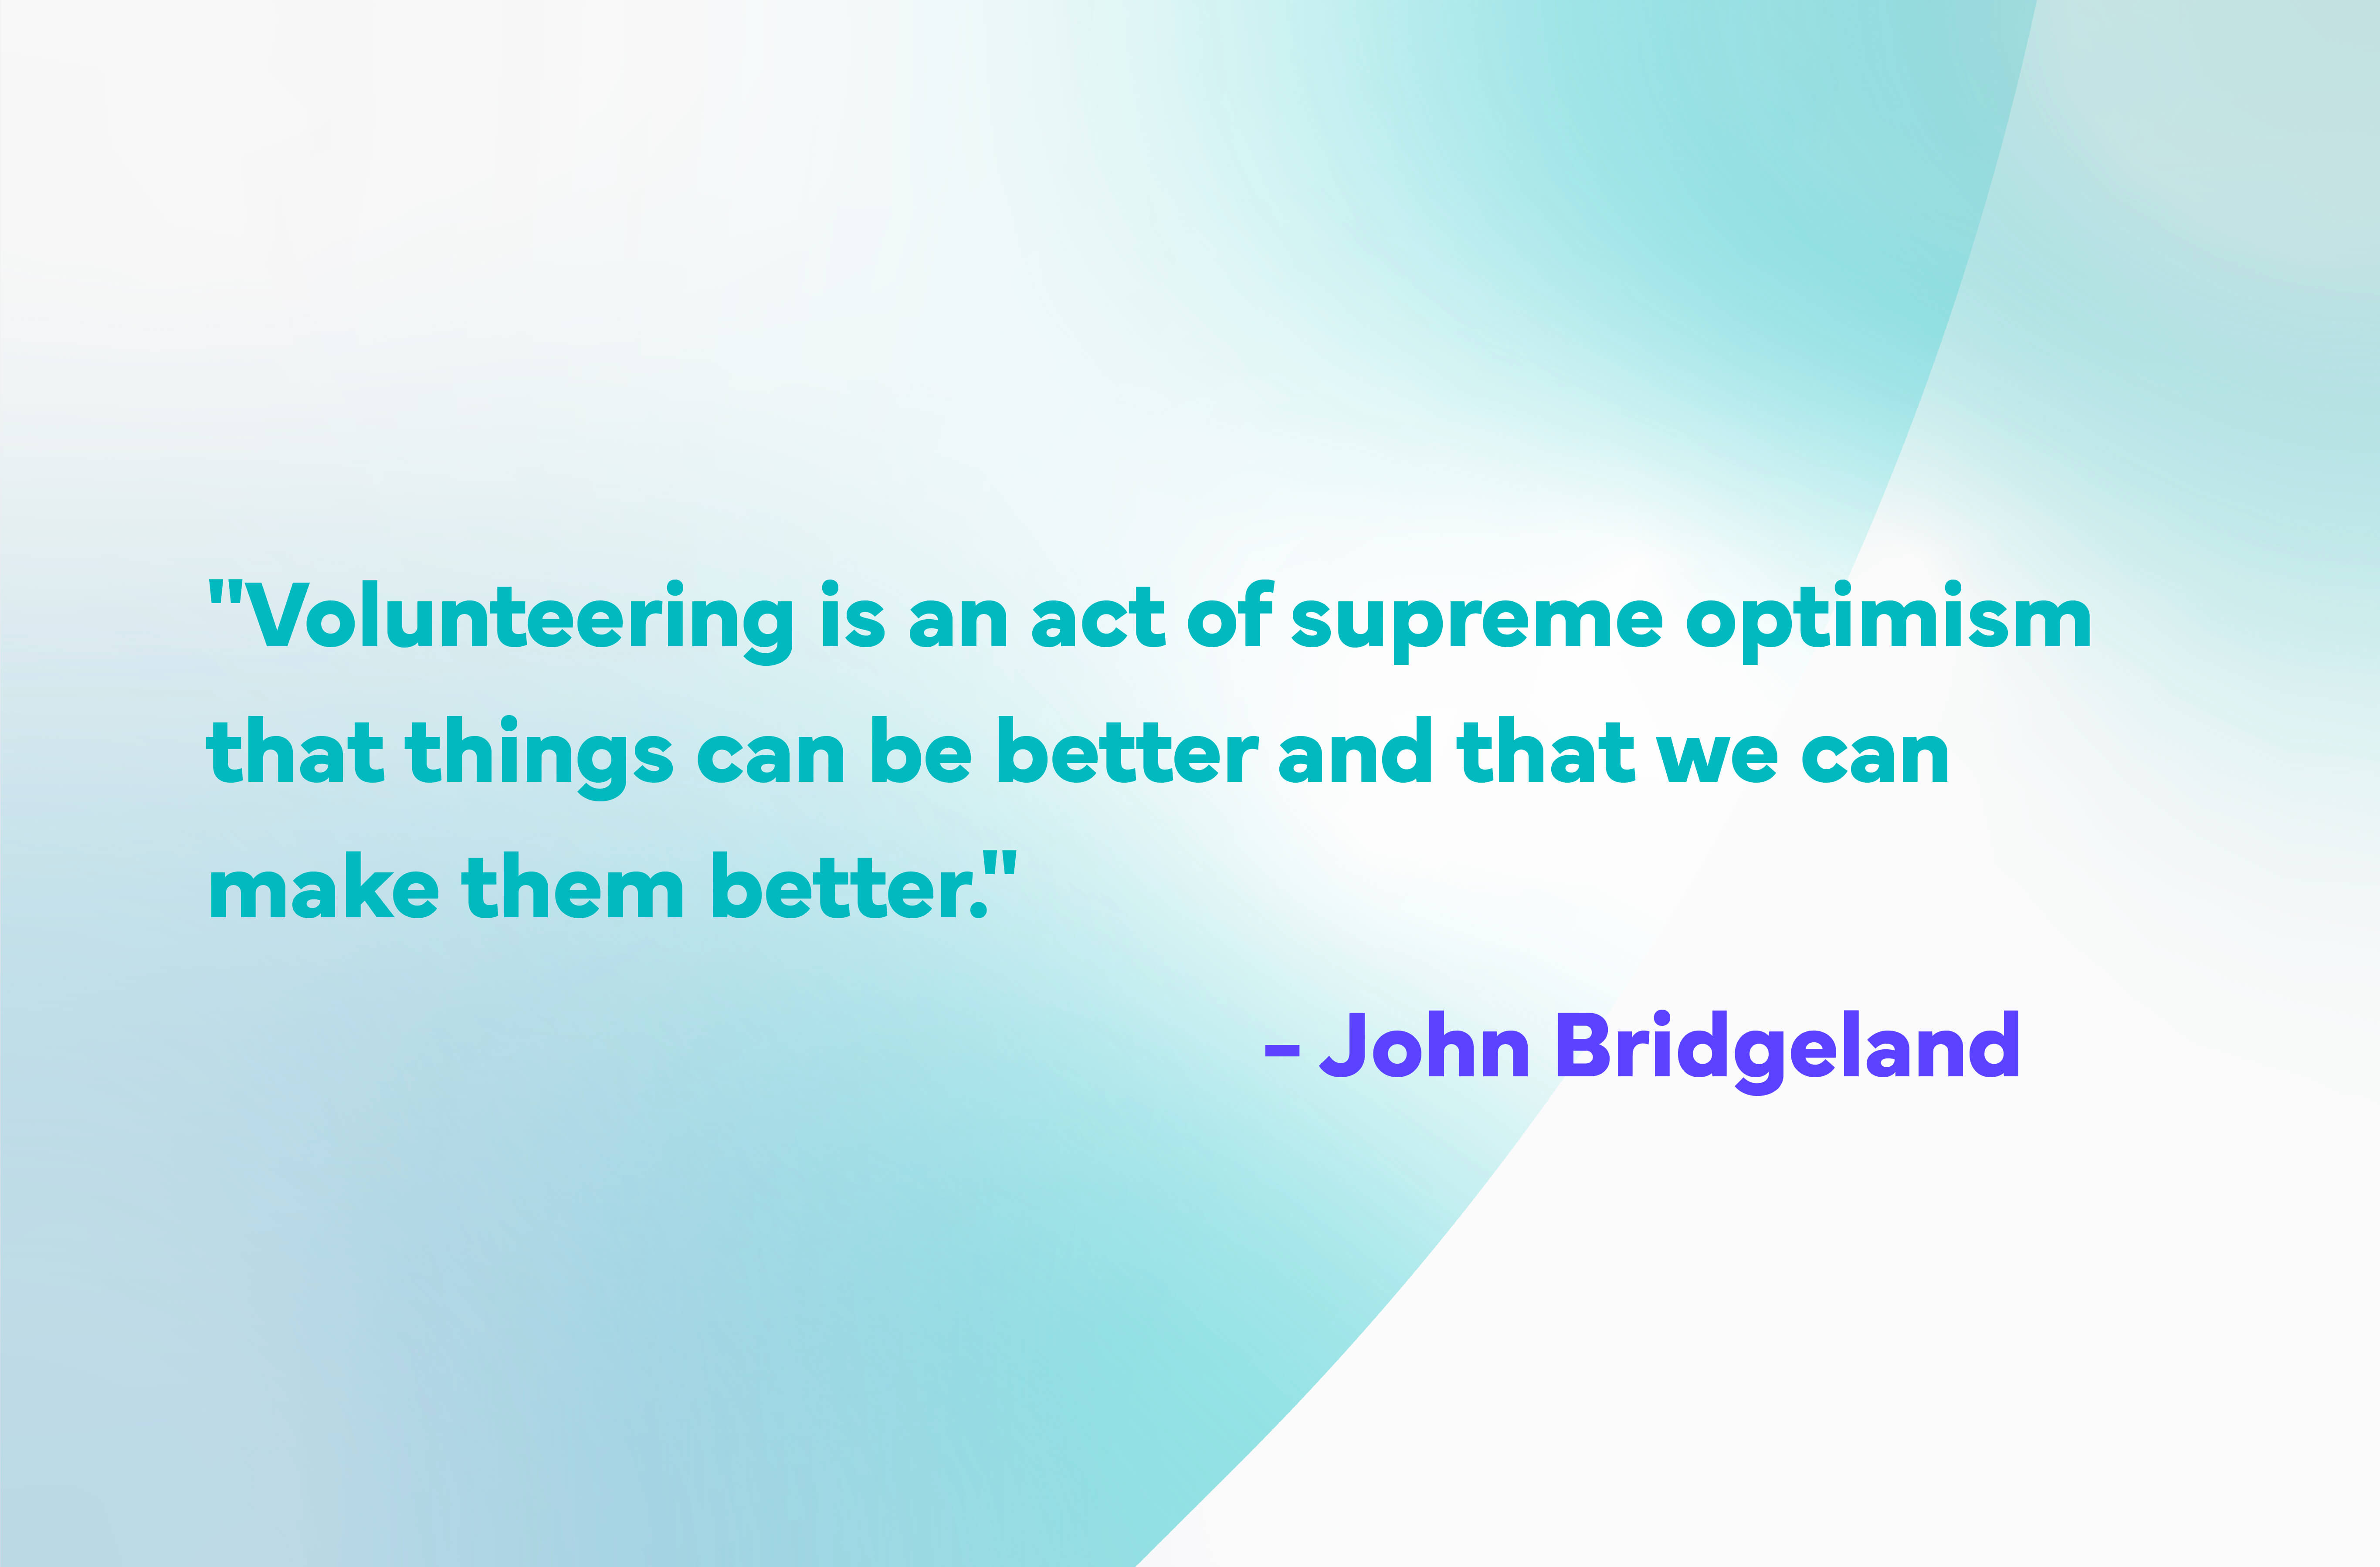 Volunteer-Quotes-john bridgeland volunteering is the act of optimism that things can be better (6)